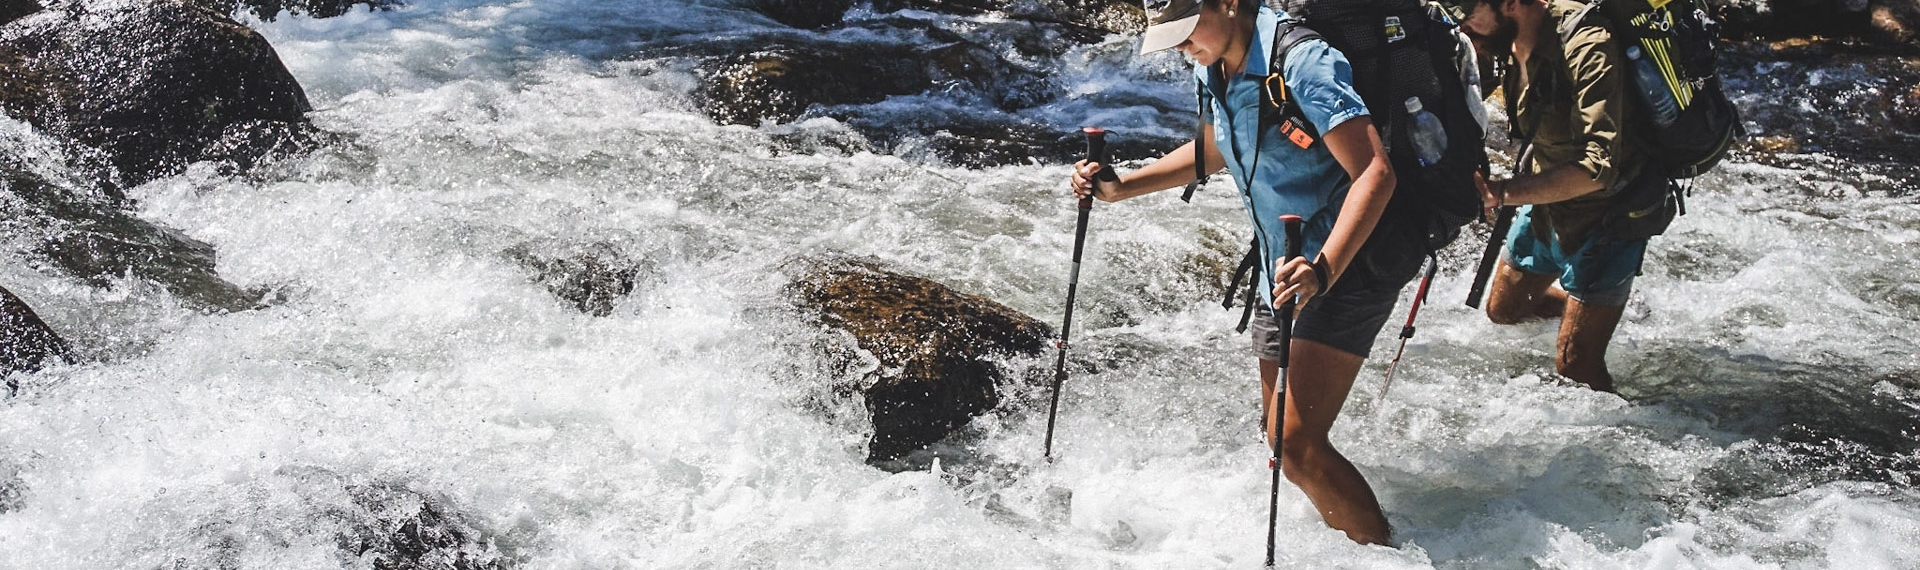 Stream crossing safety advice for hiking on the Pacific Crest Trail